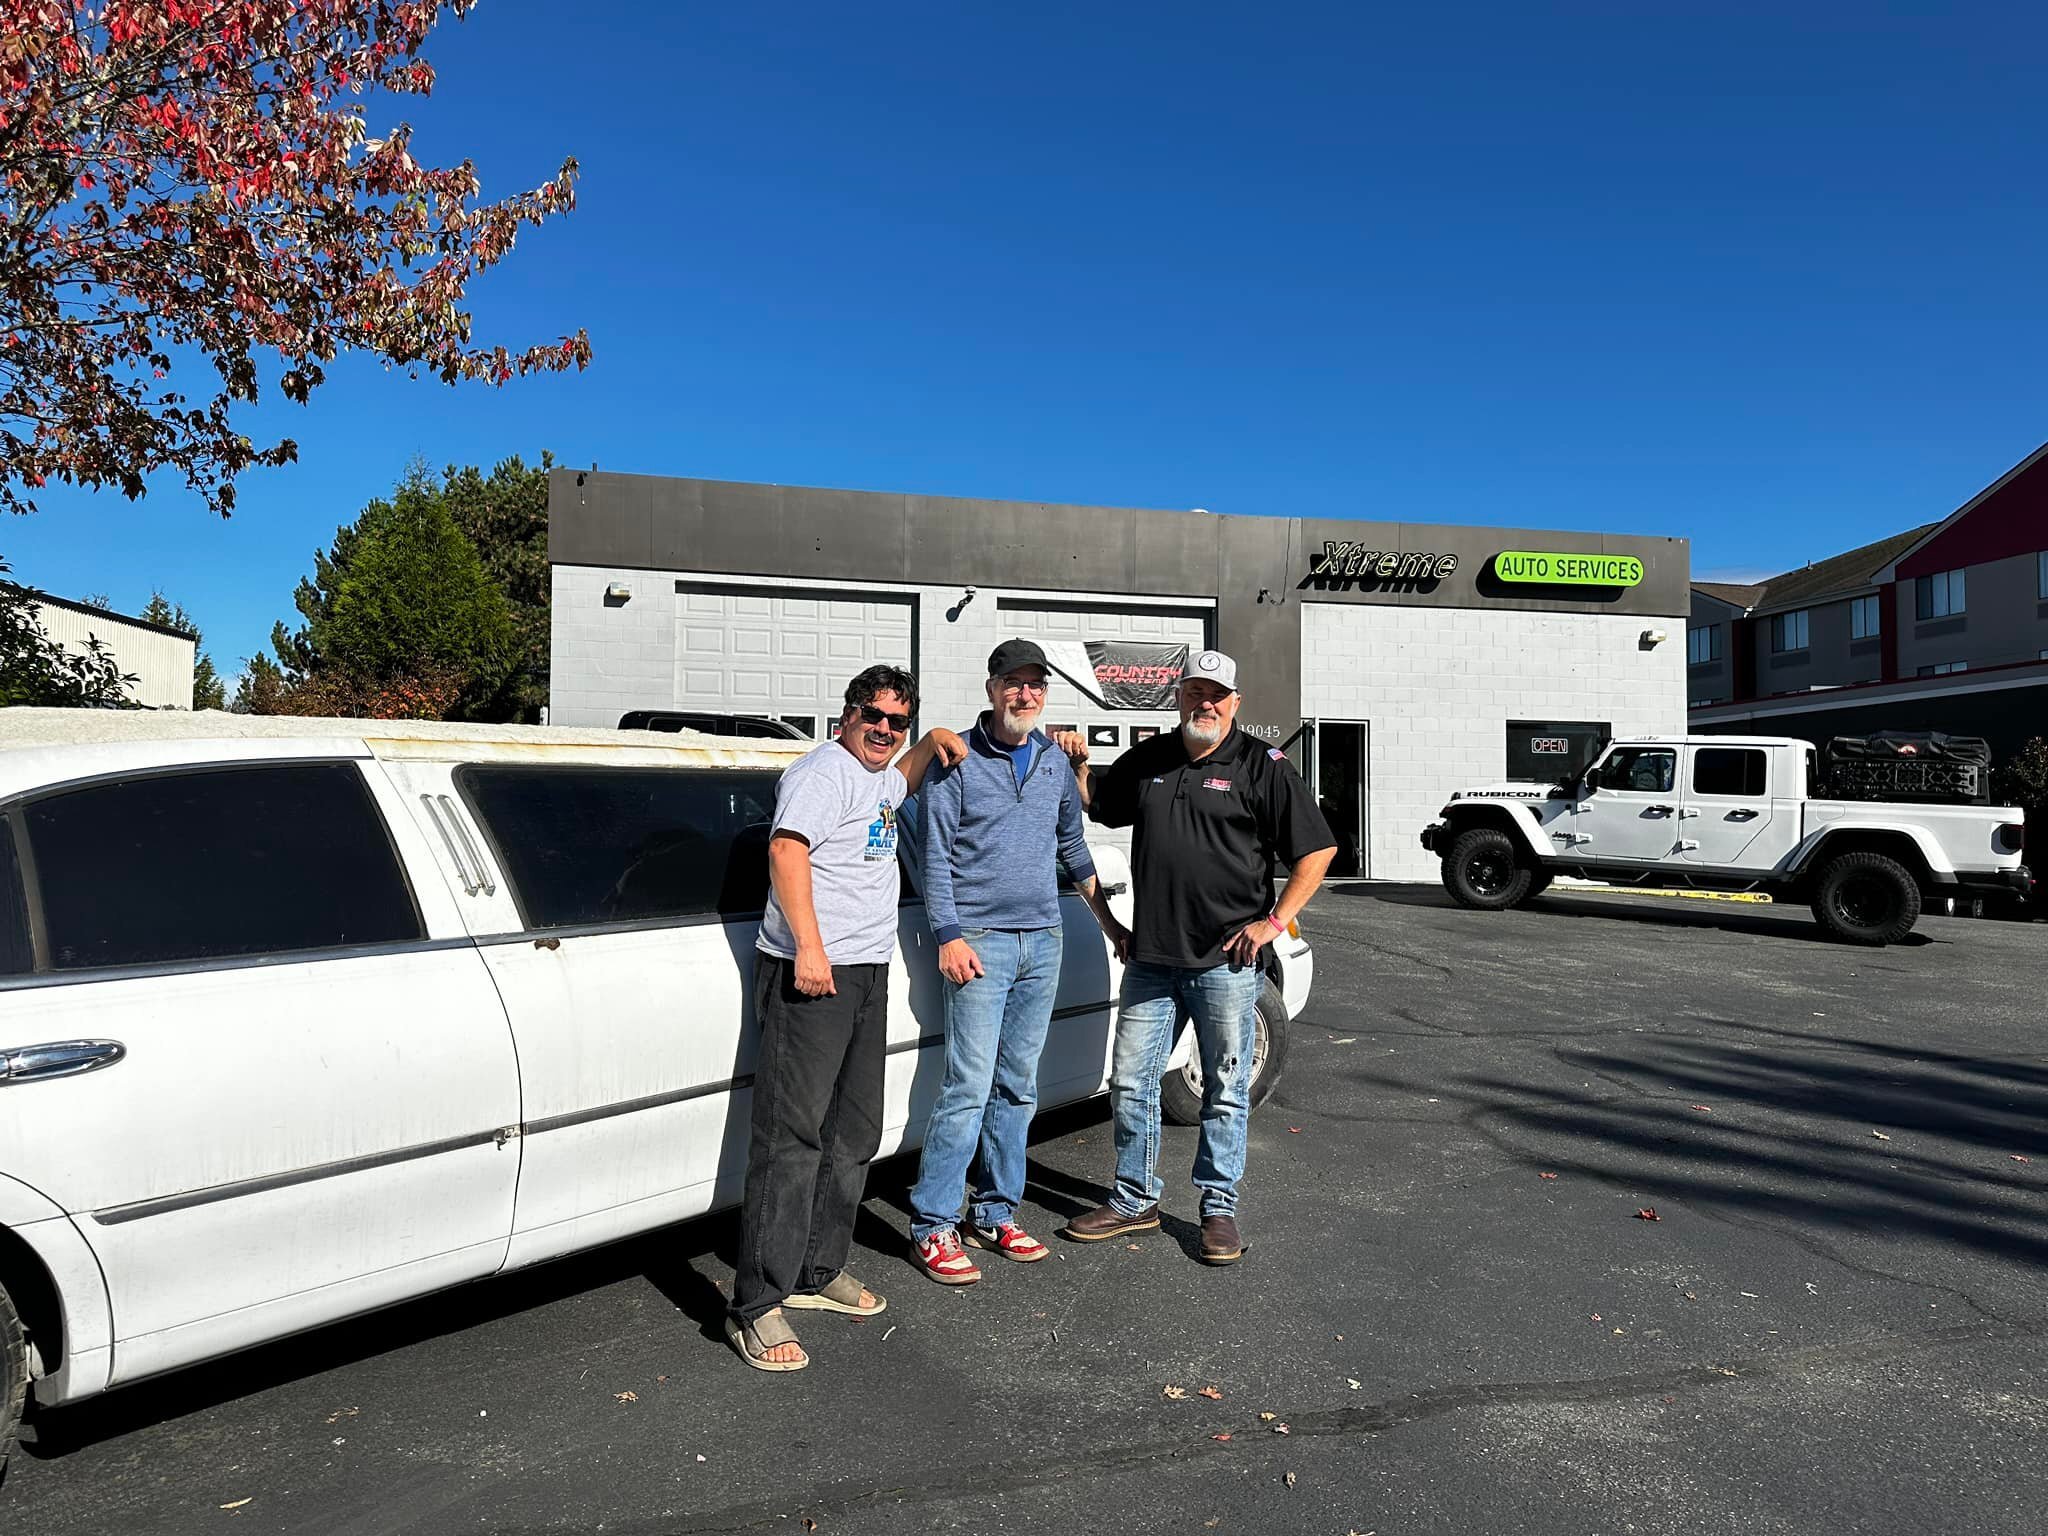 Big shout out and Thanks to  Khaos Ann Chelsea ￼ for bringing my Limo up from California for the next ￼ Guinness world record attempt.￼ getting it checked out by extreme automotive to make sure the transmission and engine are in good working order th